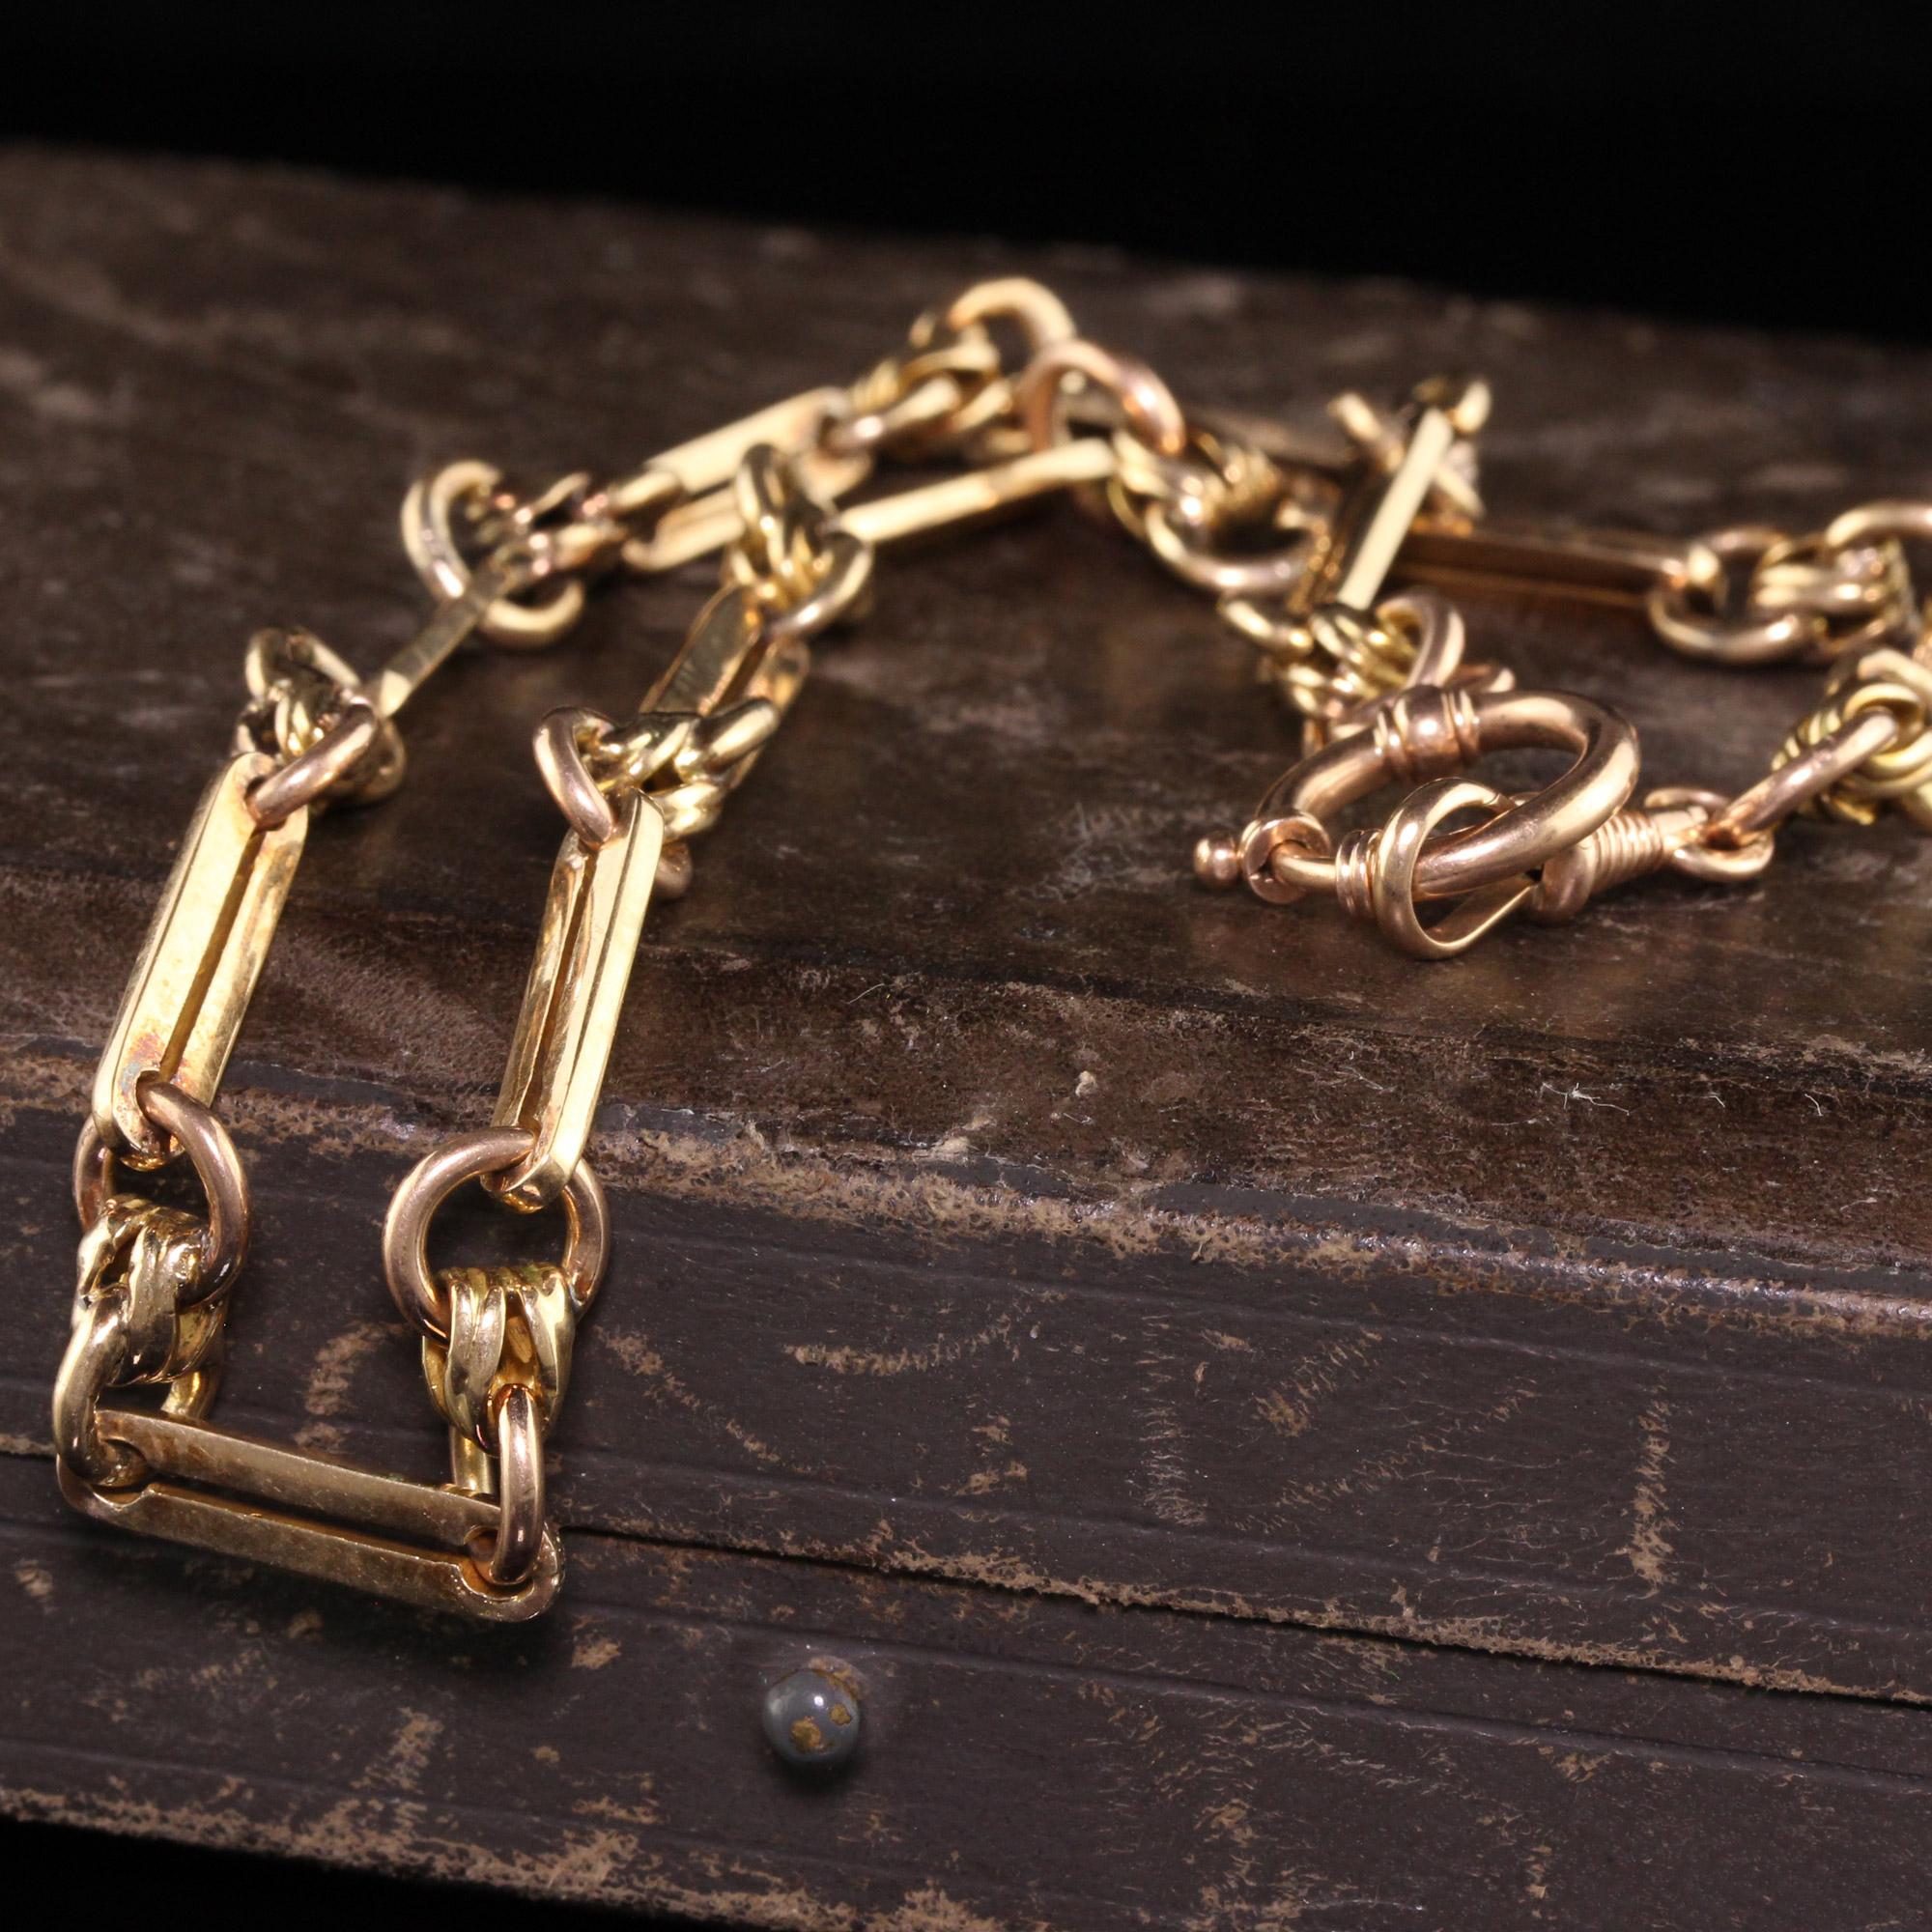 Beautiful Antique Victorian 14K Yellow Gold Intricate Necklace / Watch Fob - 14 Inches. This beautiful chain is crafted in 14K yellow gold. The chain has a nice design link going around the entire piece and is it in good condition.

Item